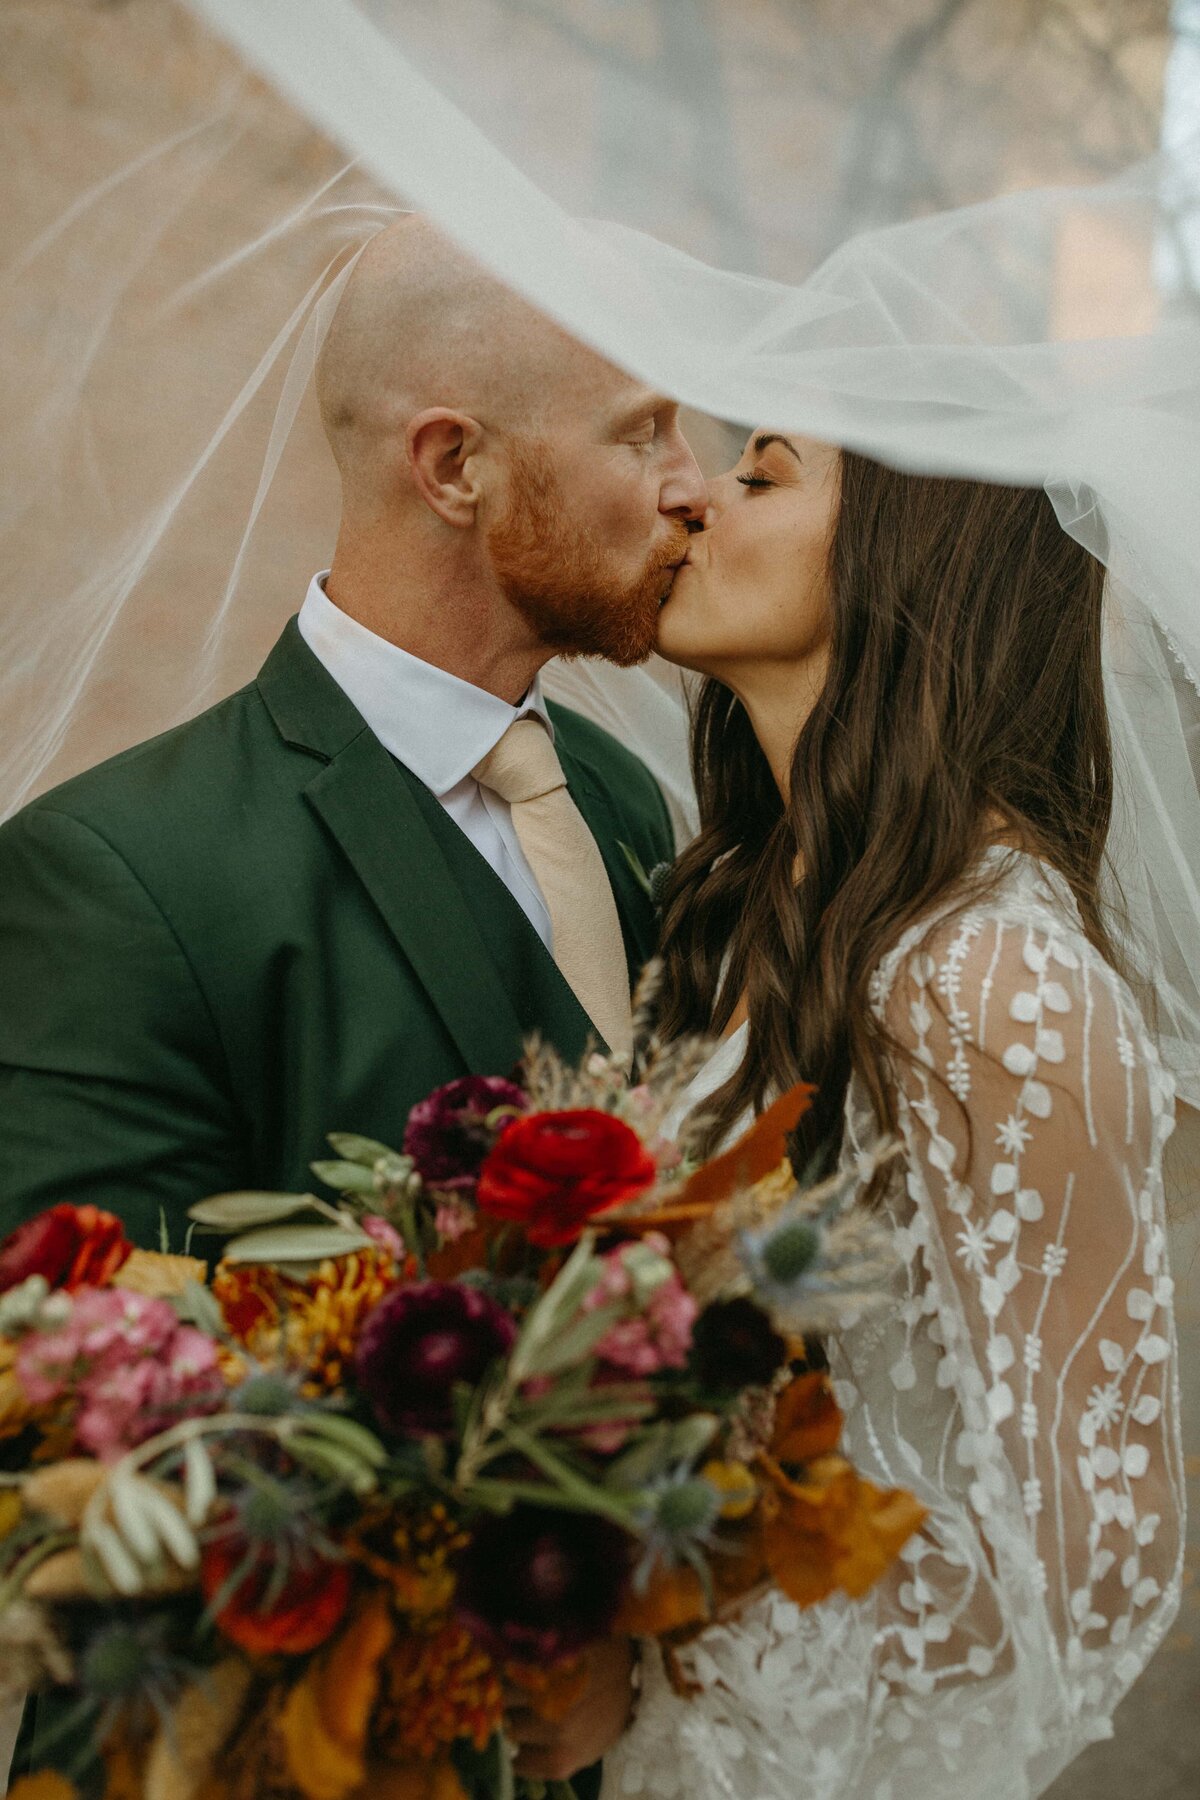 A bride and groom kissing under the bride's veil, the groom in a green suit and the bride holding a vibrant bouquet at their Iowa wedding.